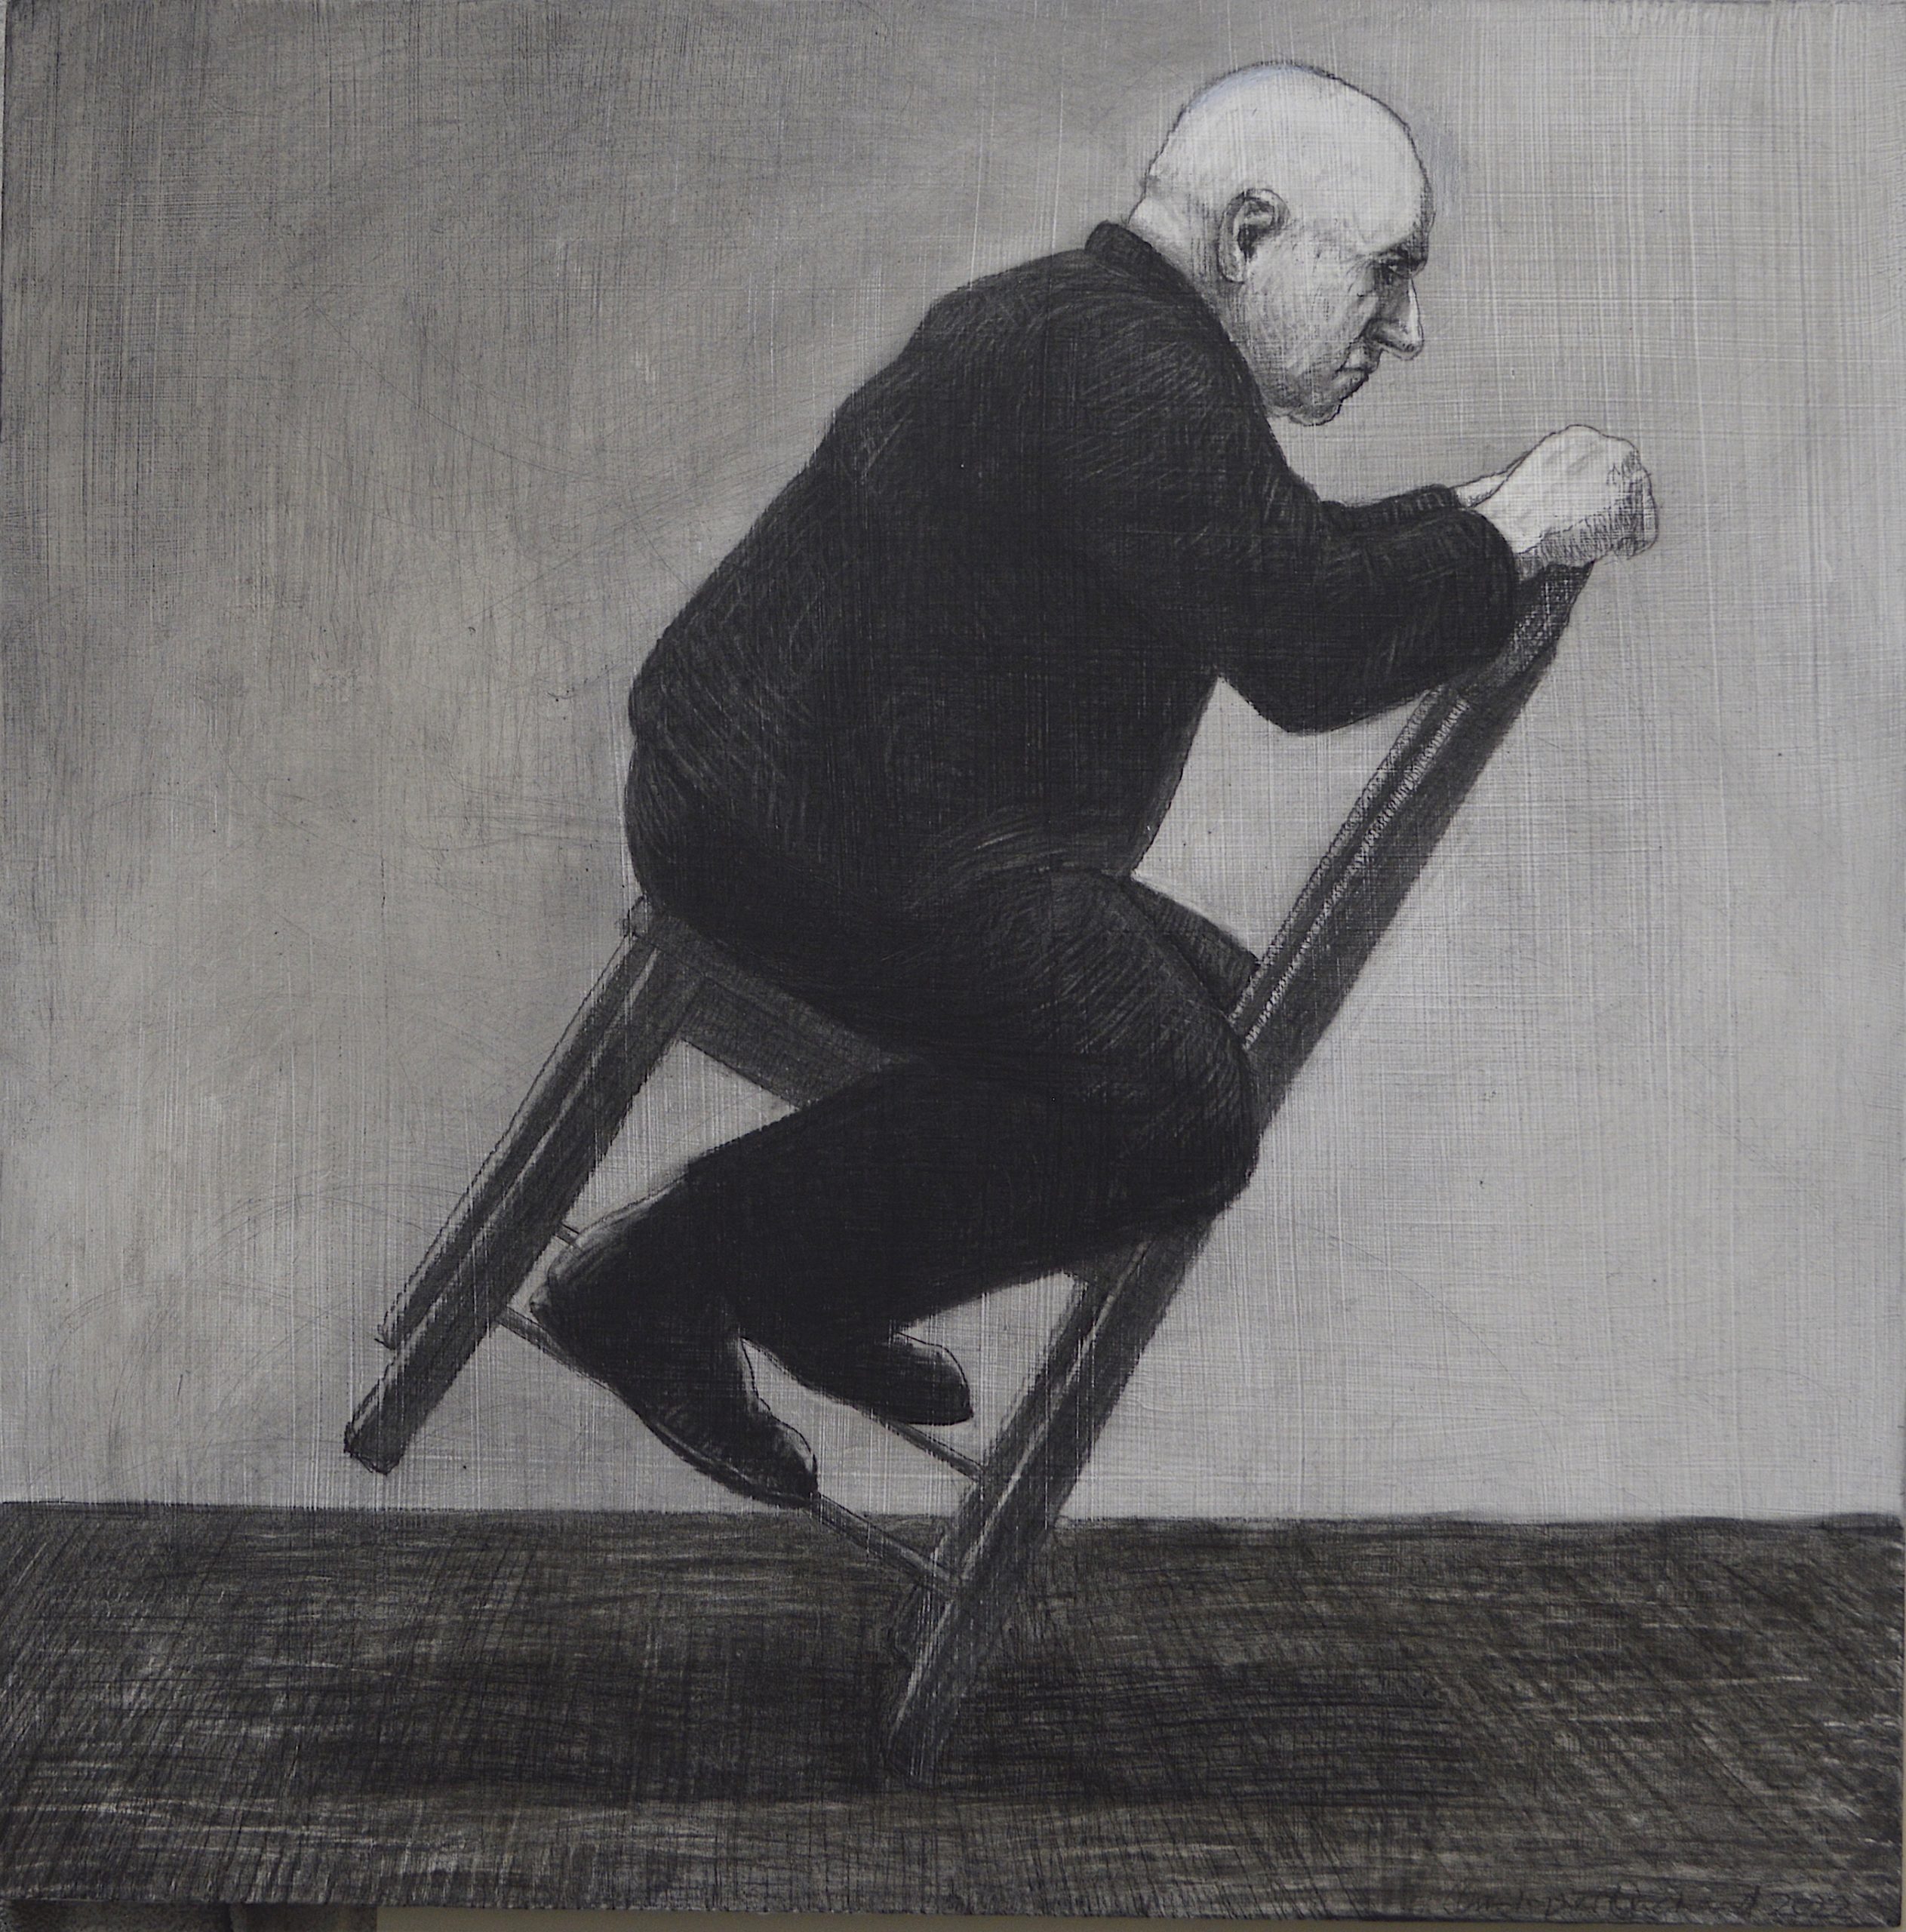 Christopher Orchard 'Tilt' Charcoal on gesso on wood panel 40x40cm $3,300